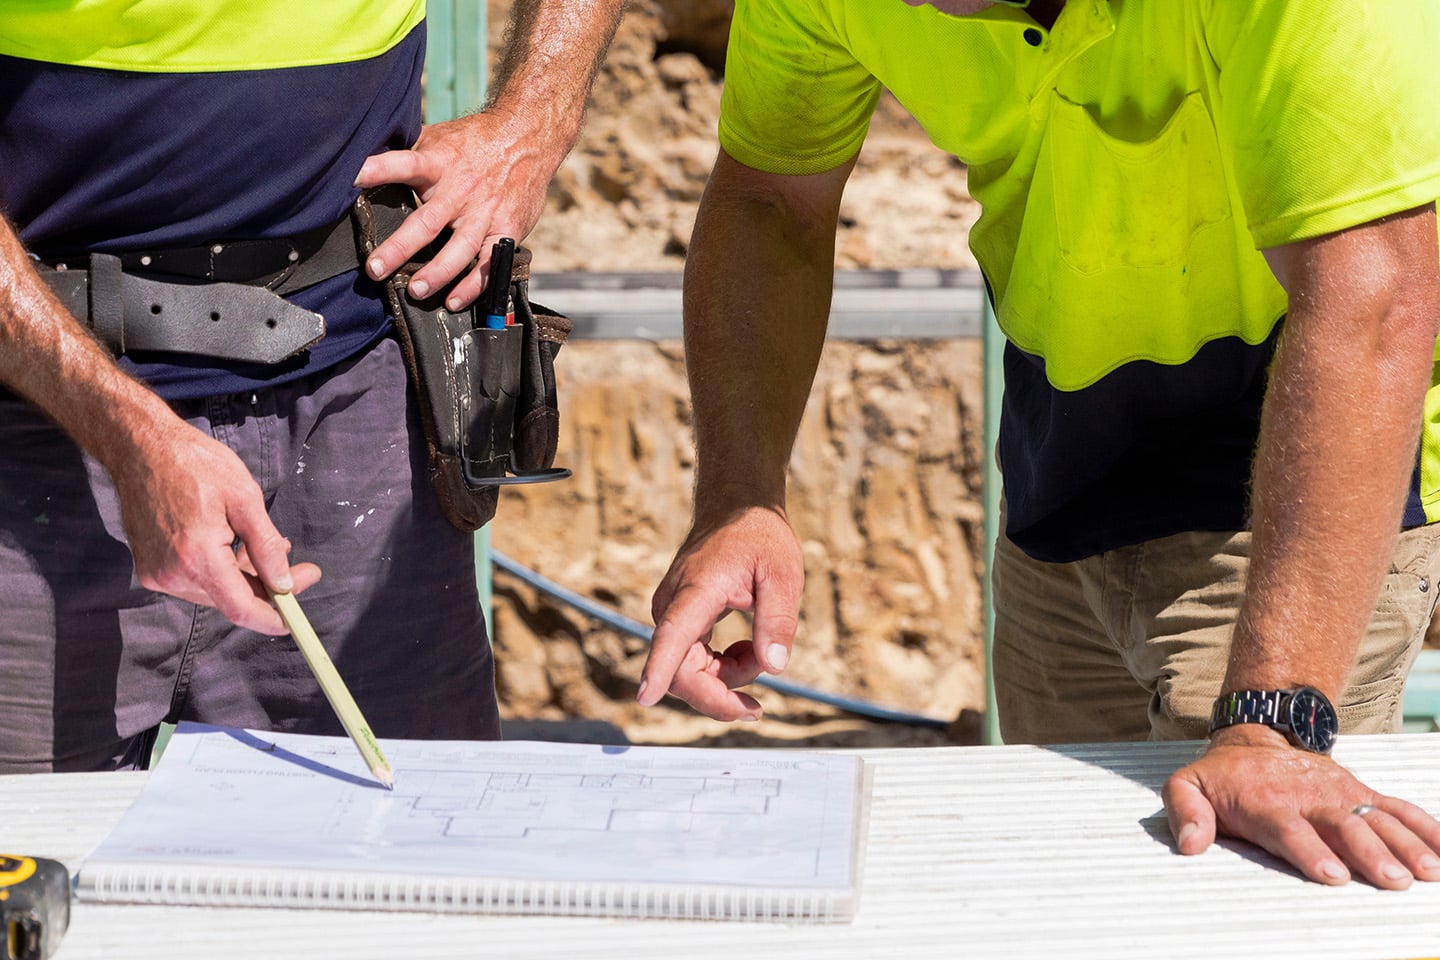 Public Sector - Quantity surveying for contract builders